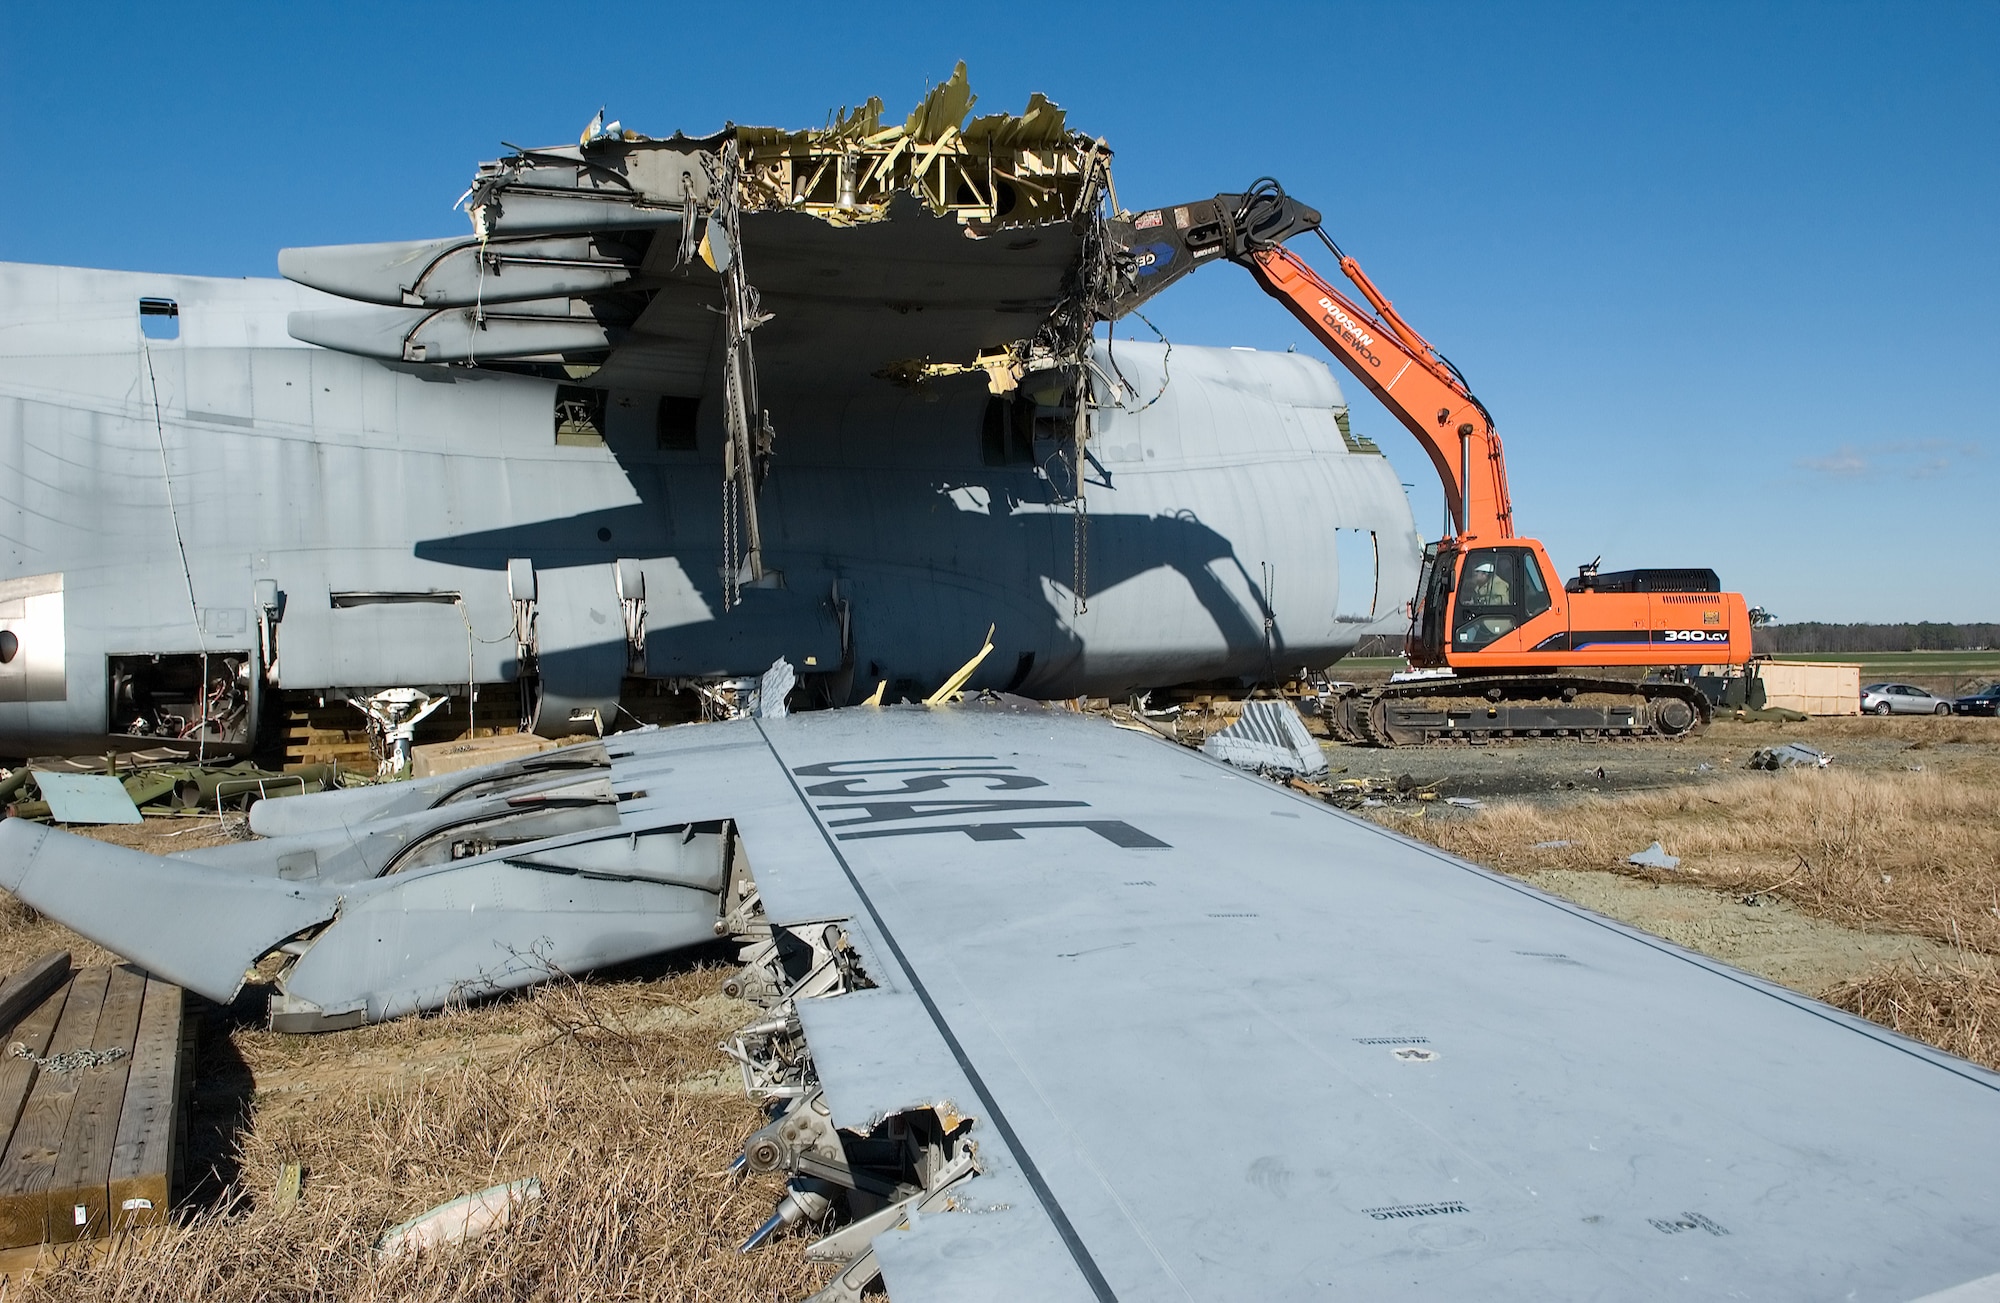 DOVER AIR FORCE BASE, Del. -- InterGroup International, an Ohio-based company that buys, reprocesses and sells scrap metal, cuts the wings off of the April 3, 2006 C-5 mishap aircraft here Jan. 24 using giant mobile shears. (U.S. Air Force Photo/Jason Minto)